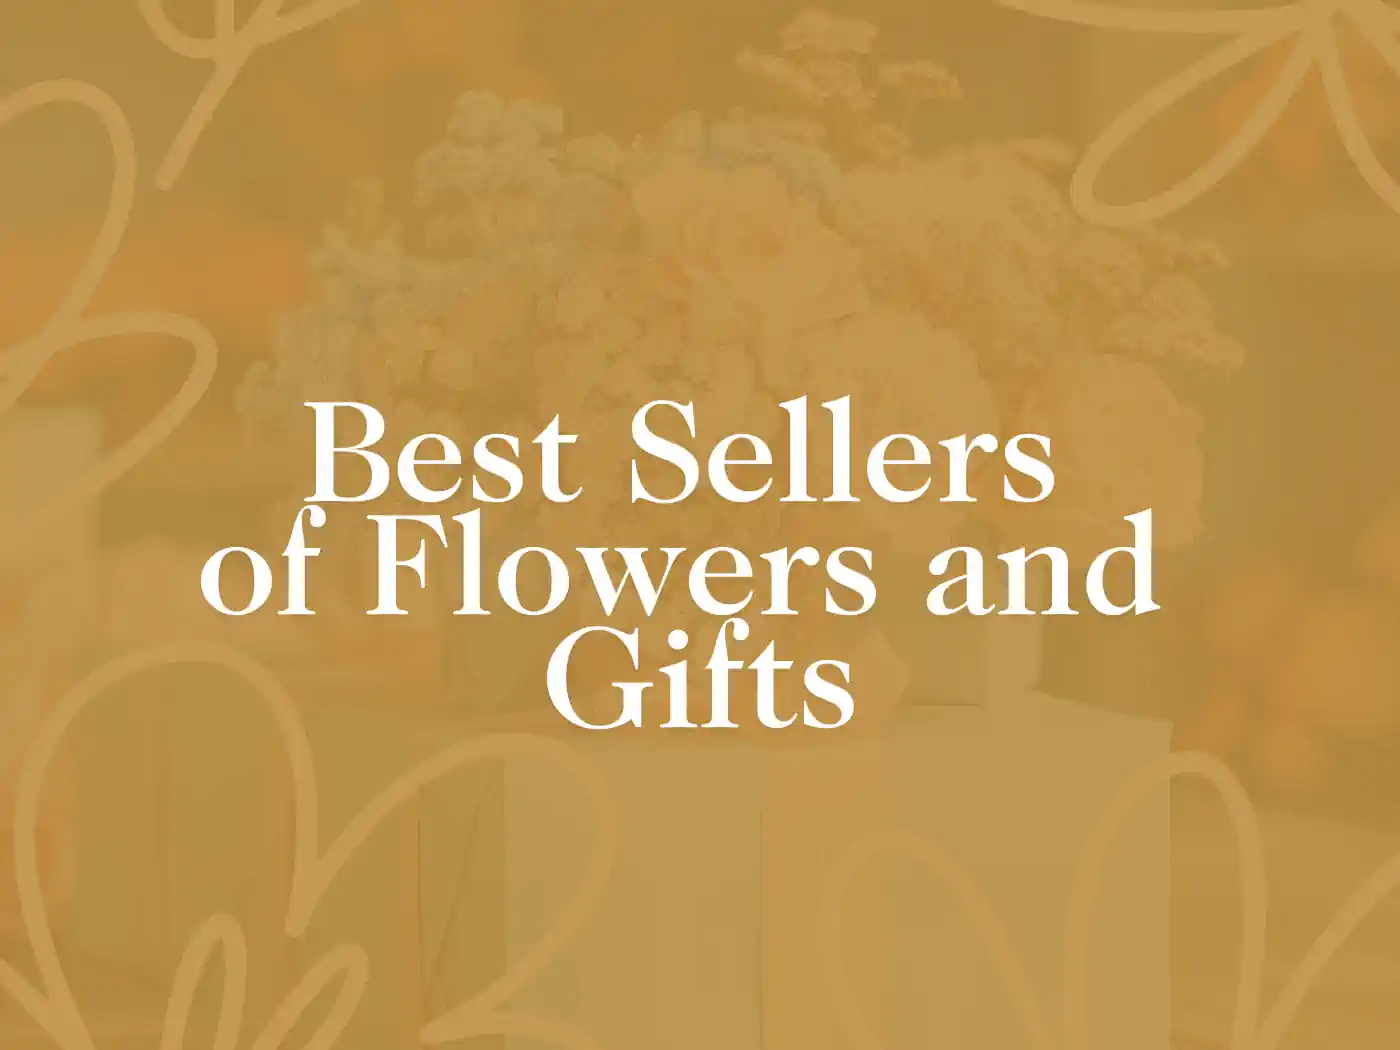 A visually appealing image showcasing a beautifully arranged bouquet of flowers set against a soft, elegant background. Fabulous Flowers and Gifts.